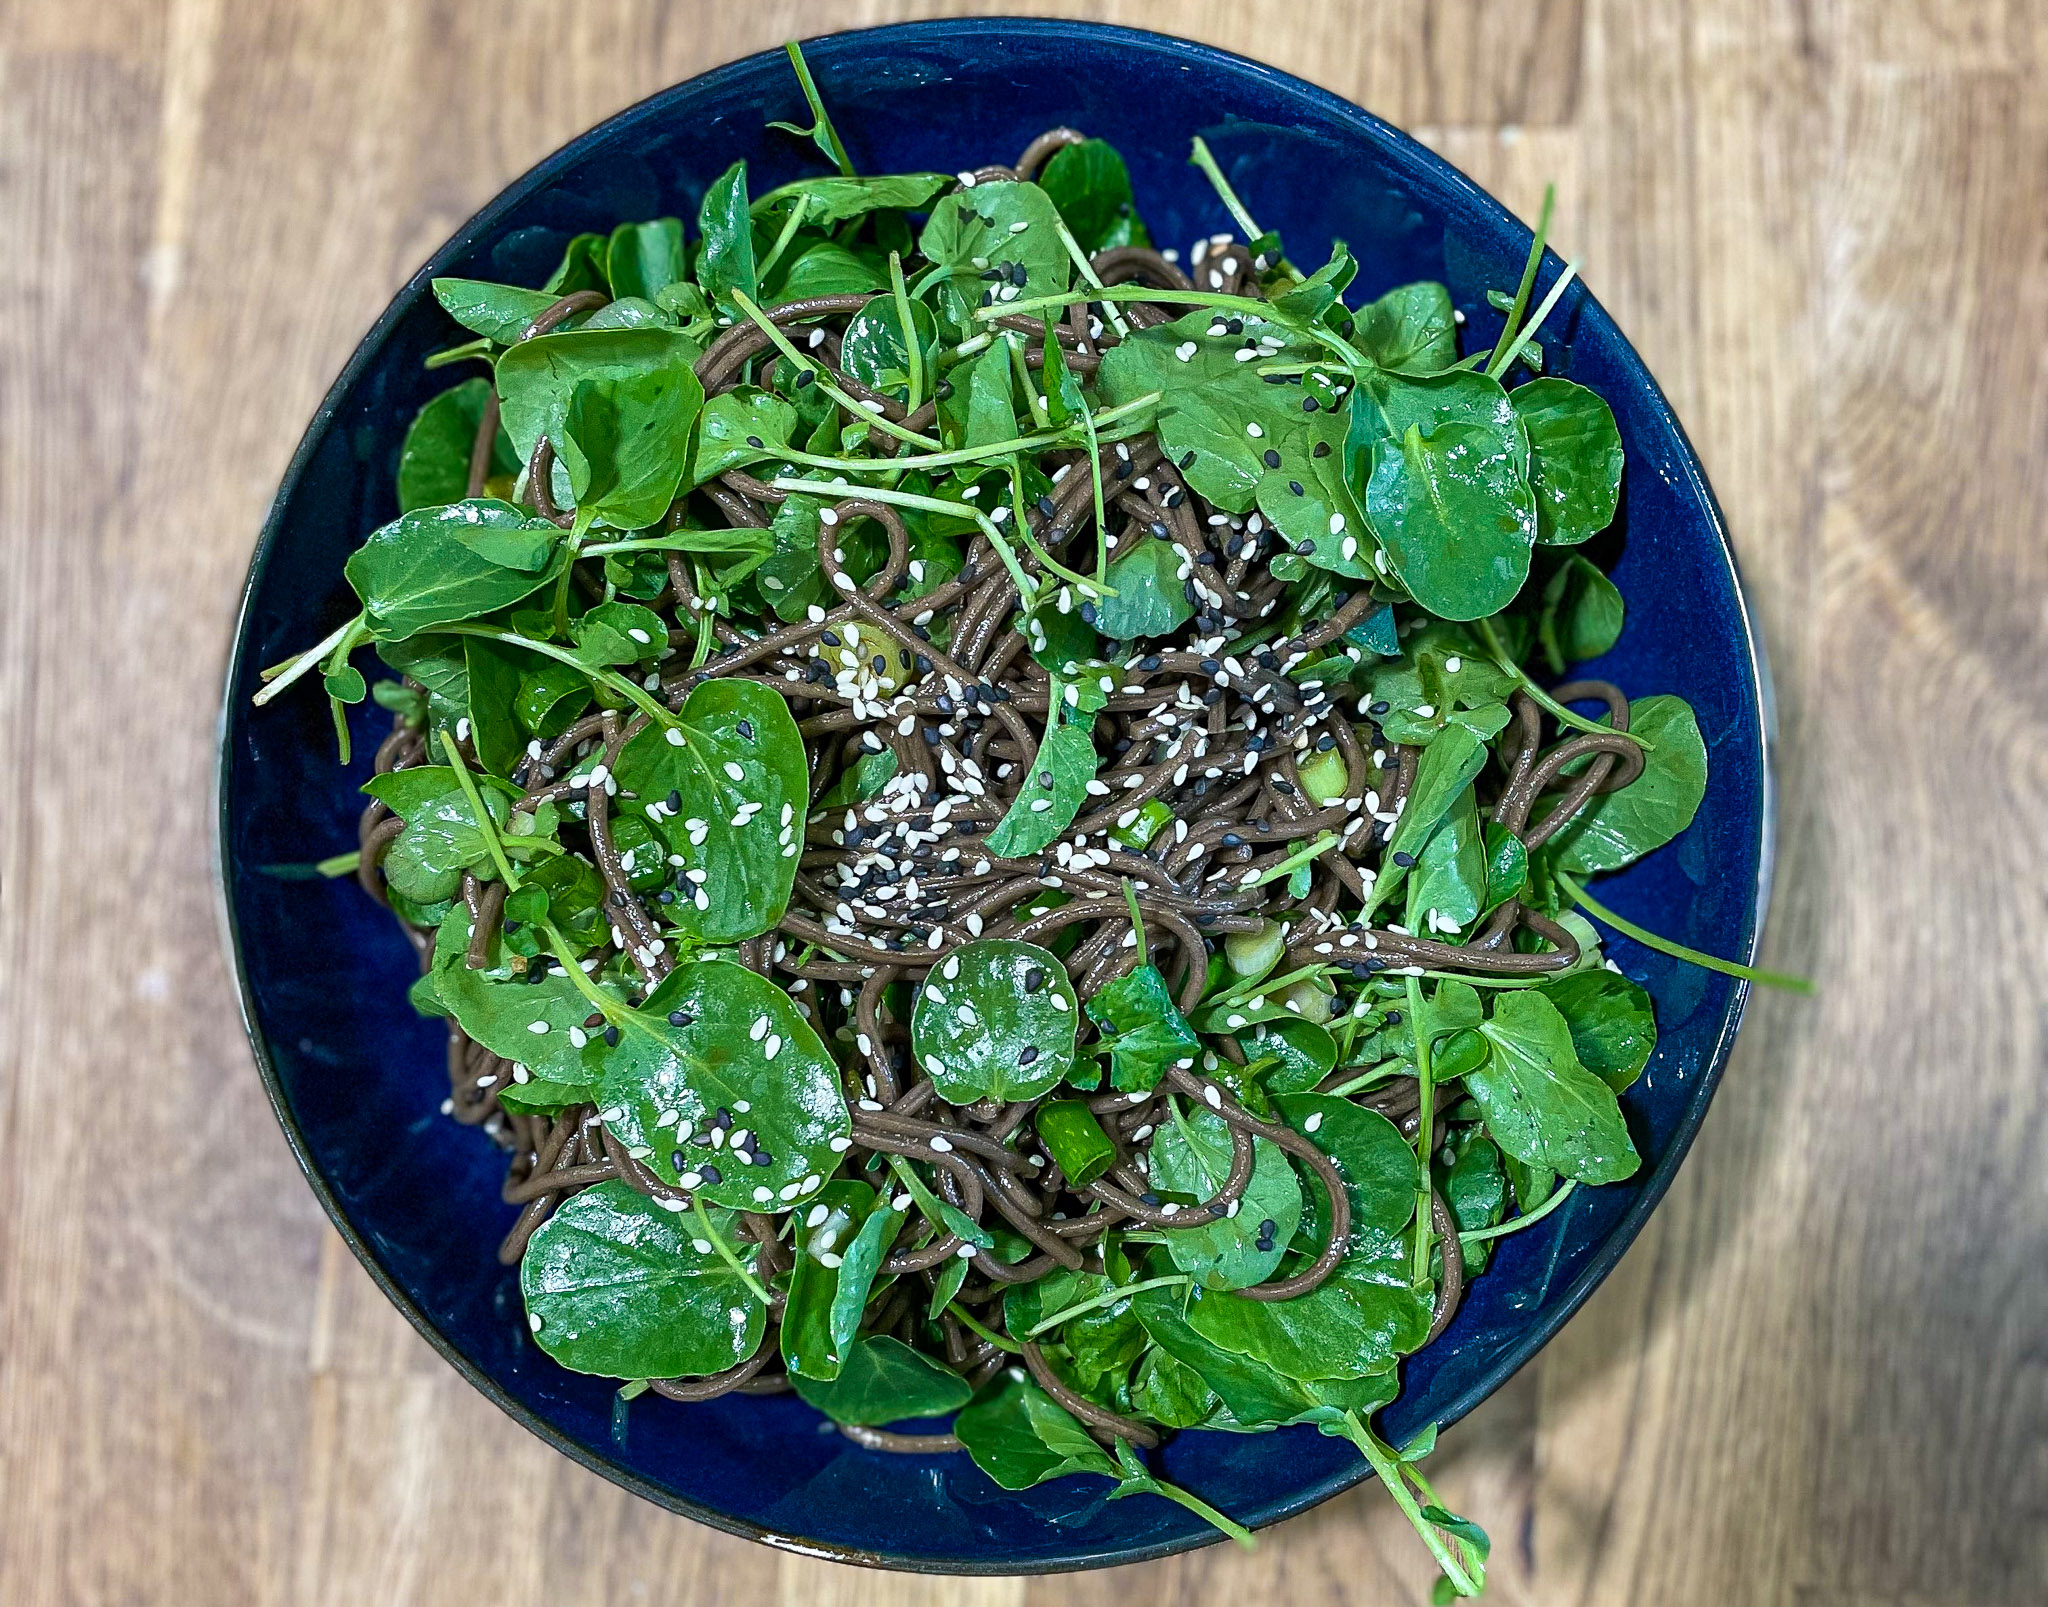 alt="a blue bowl full of soba noodle salad with lots of fresh green watercress."